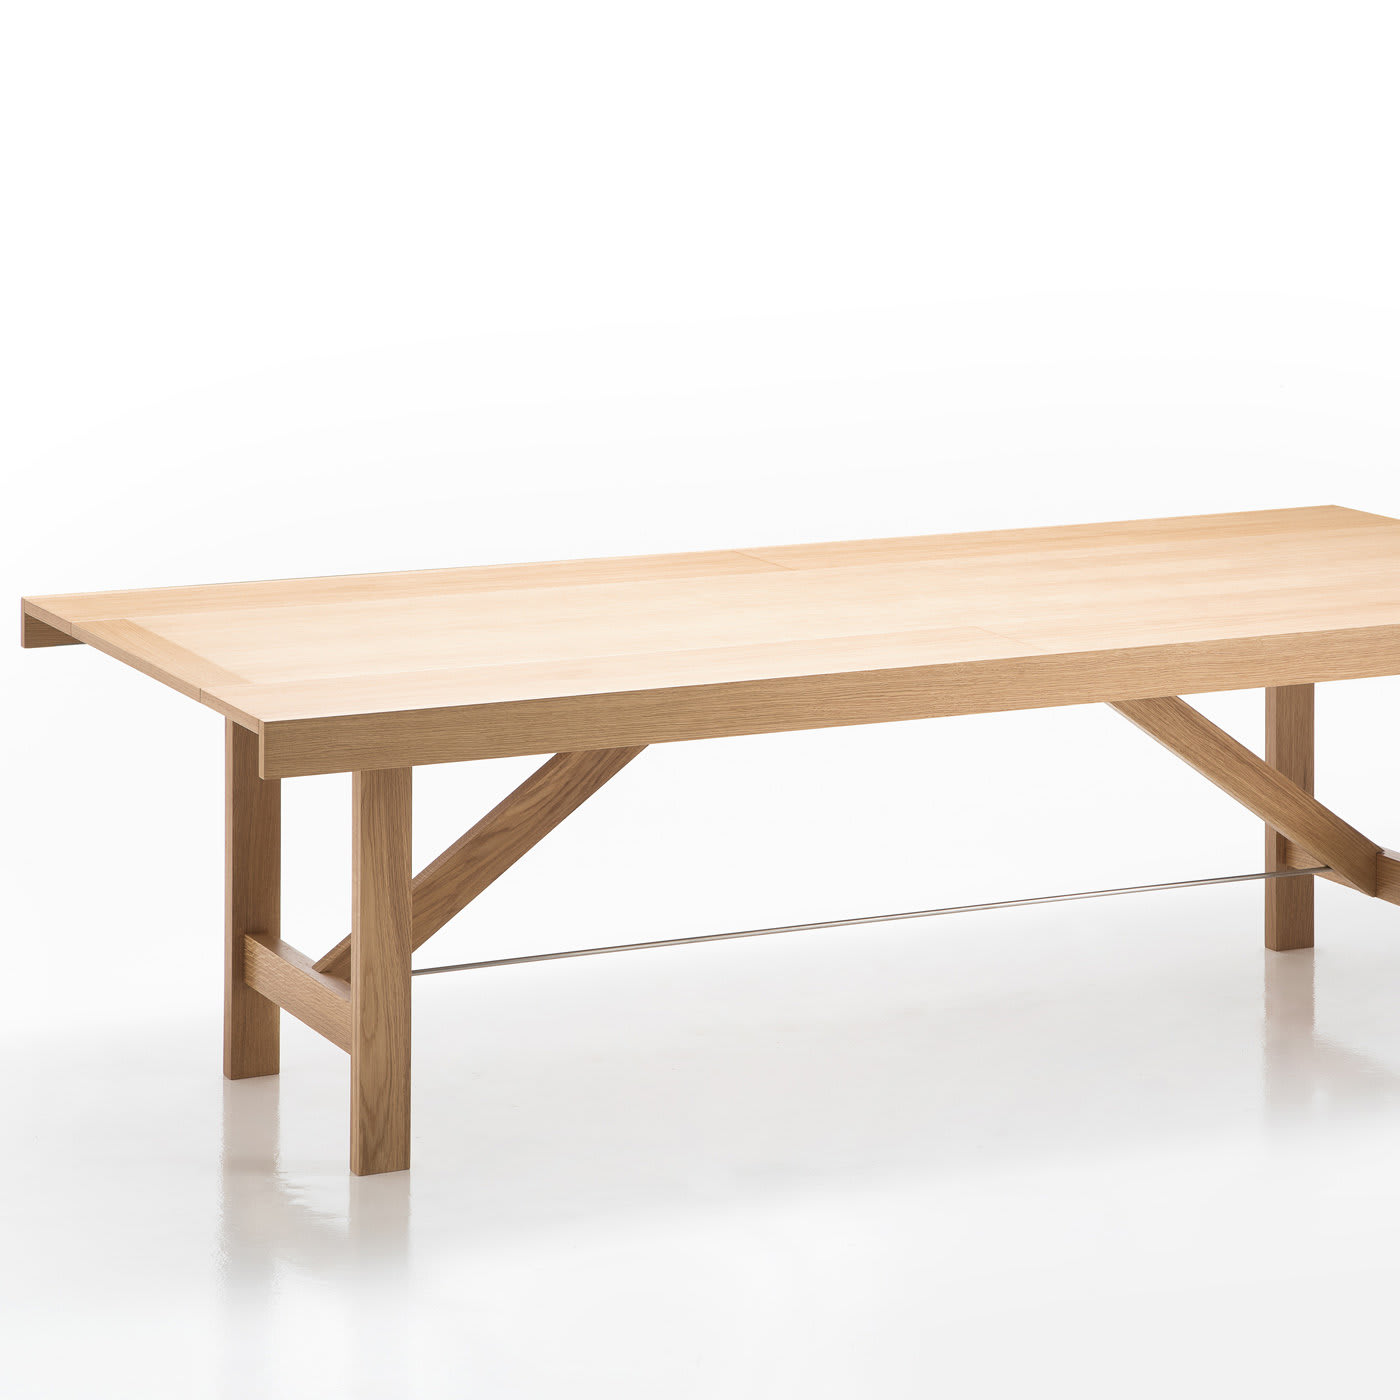 Capriata Extendable Dining Table by Carlo Cumini - Horm